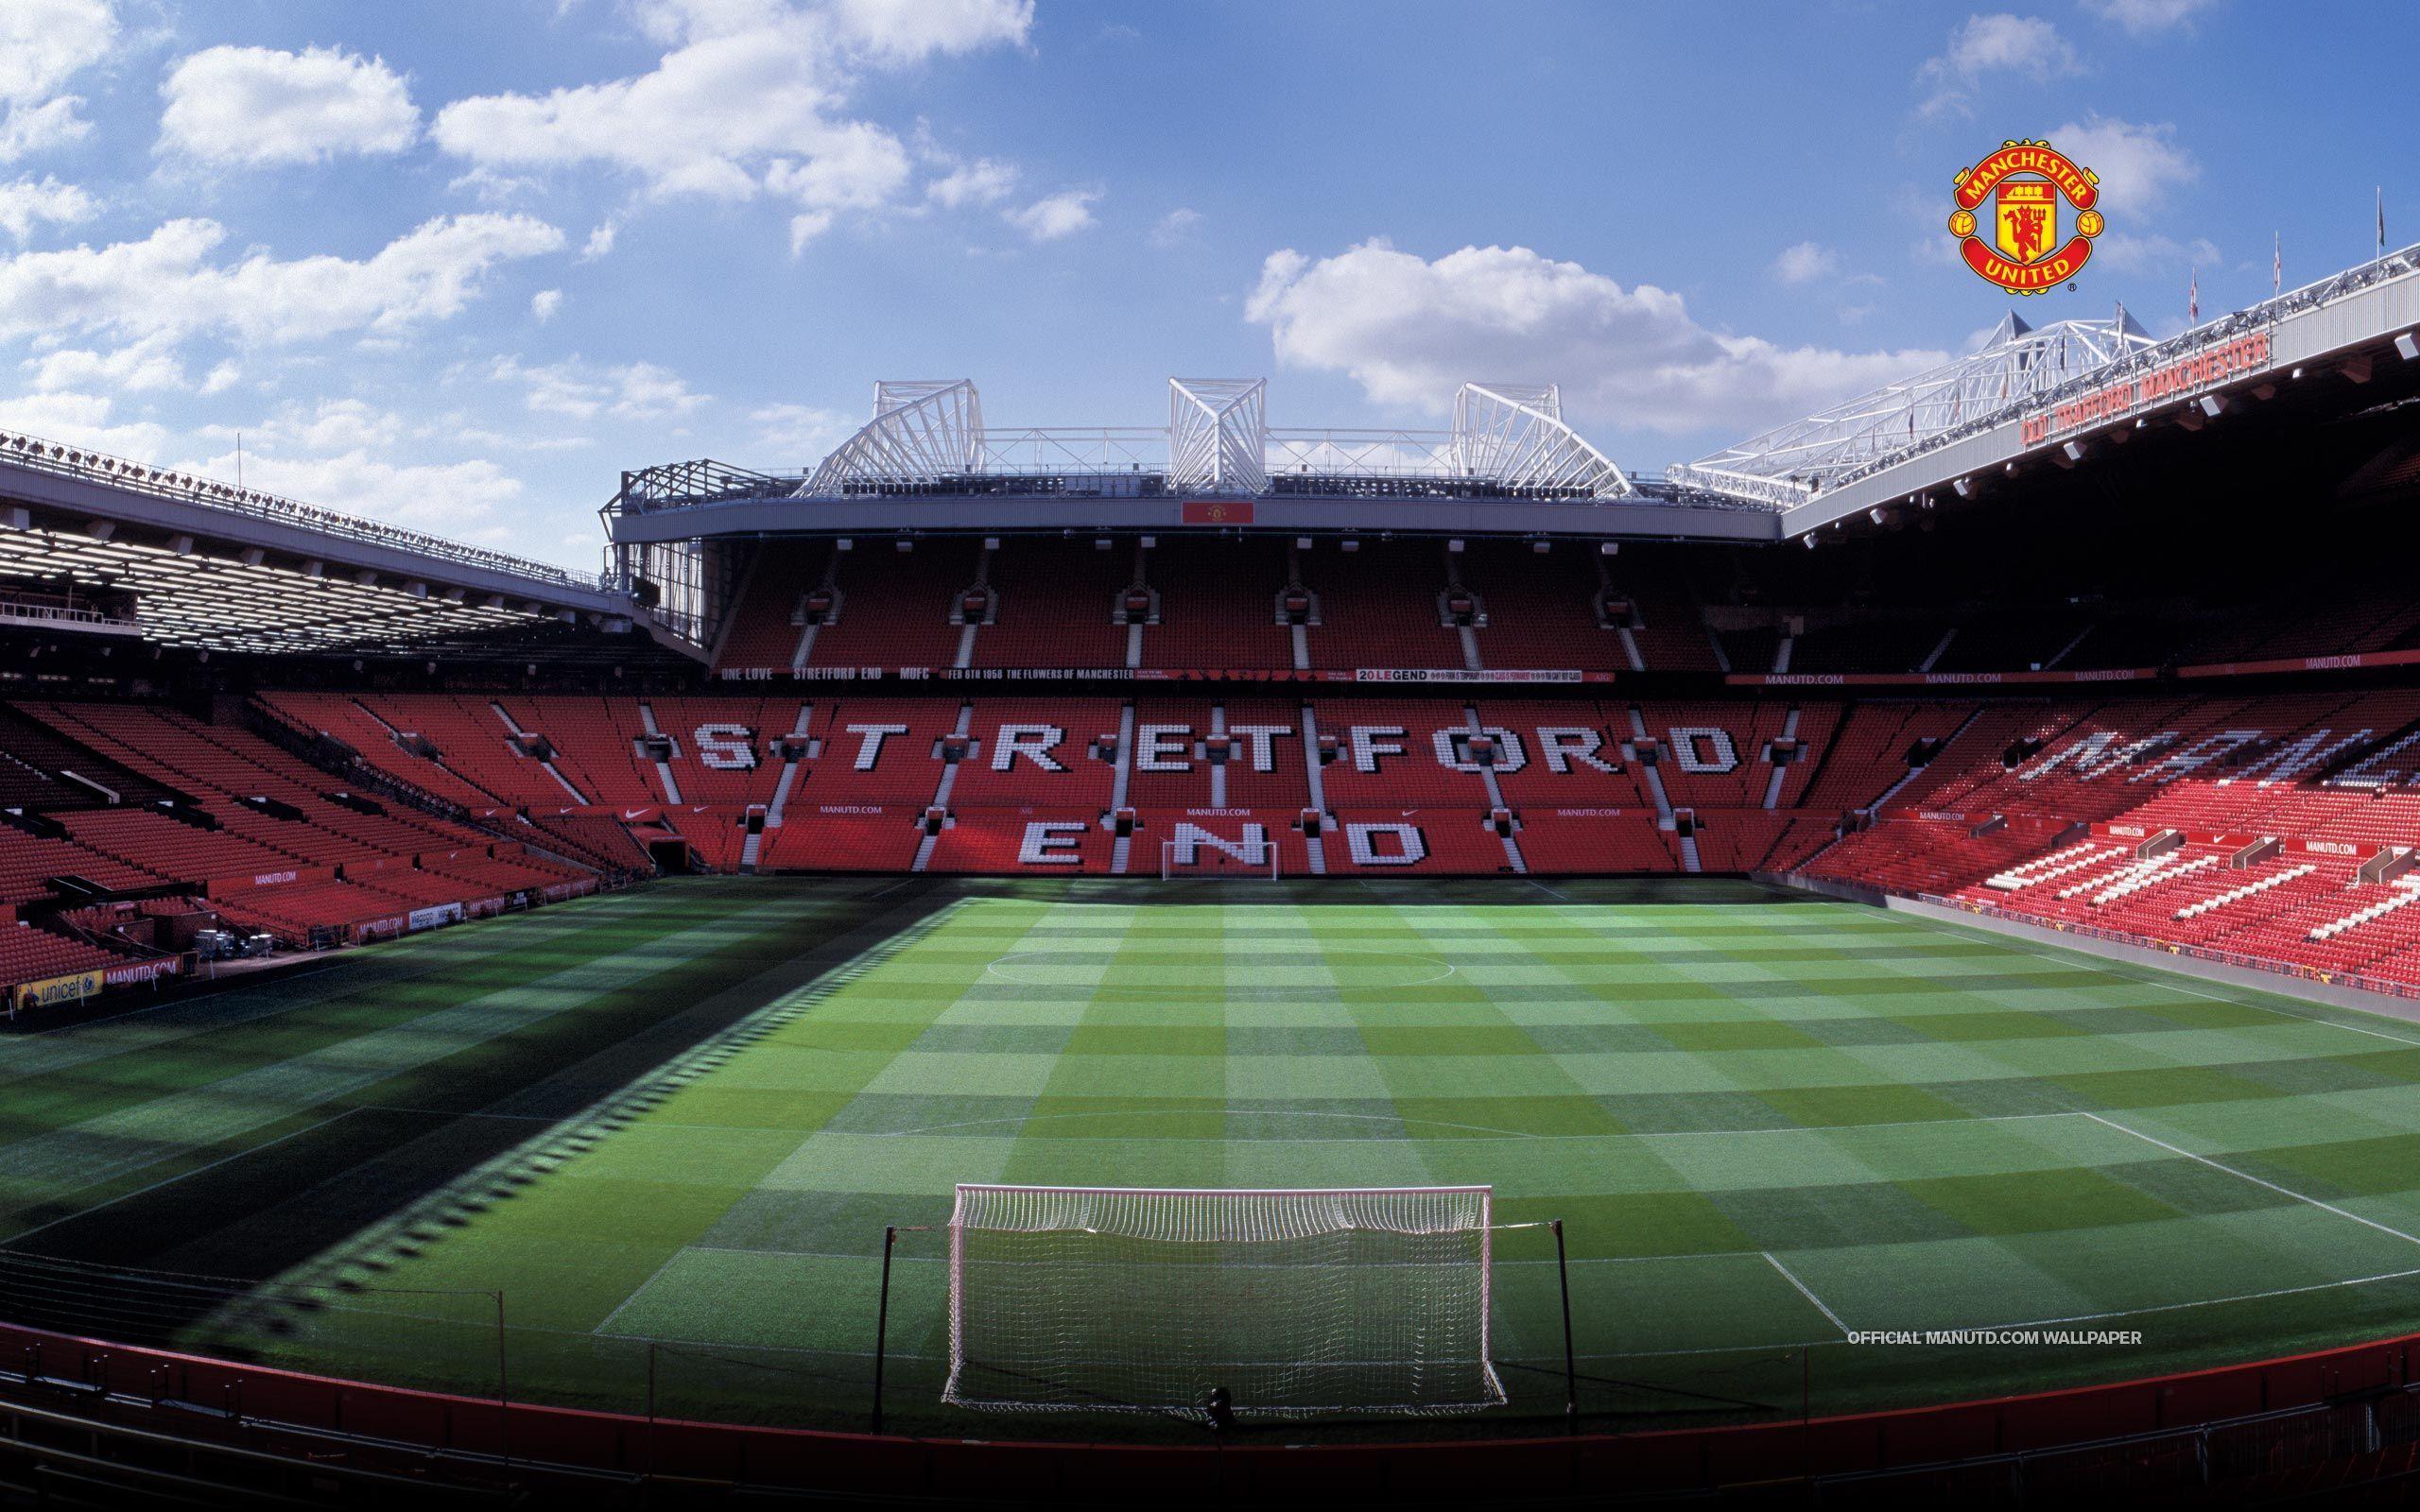 Old Trafford, The place I always wanted to go to.Someday